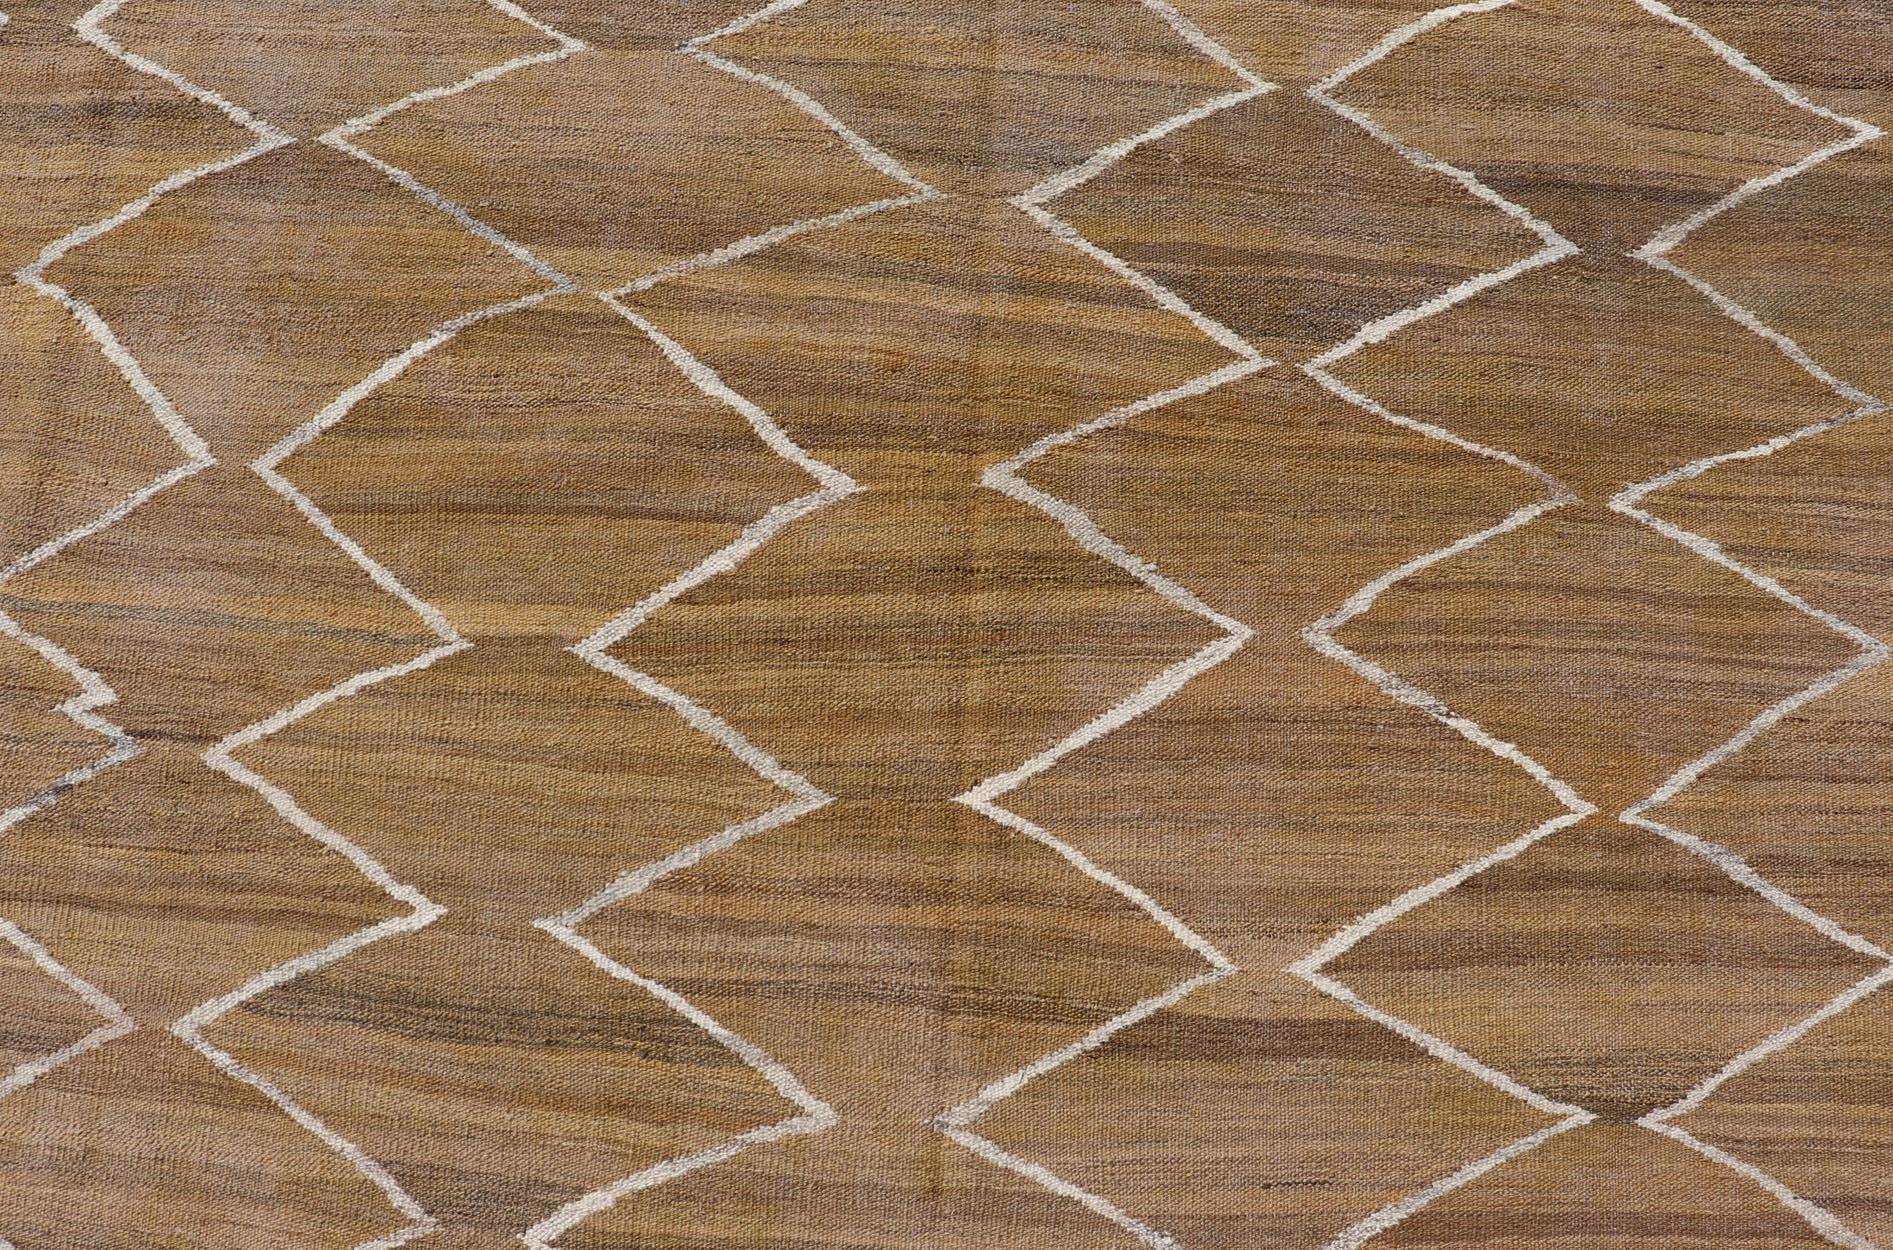 Hand-Woven Flatweave Kilim in Wool with Sub-Geometric Design in Marigold & Ivory For Sale 3